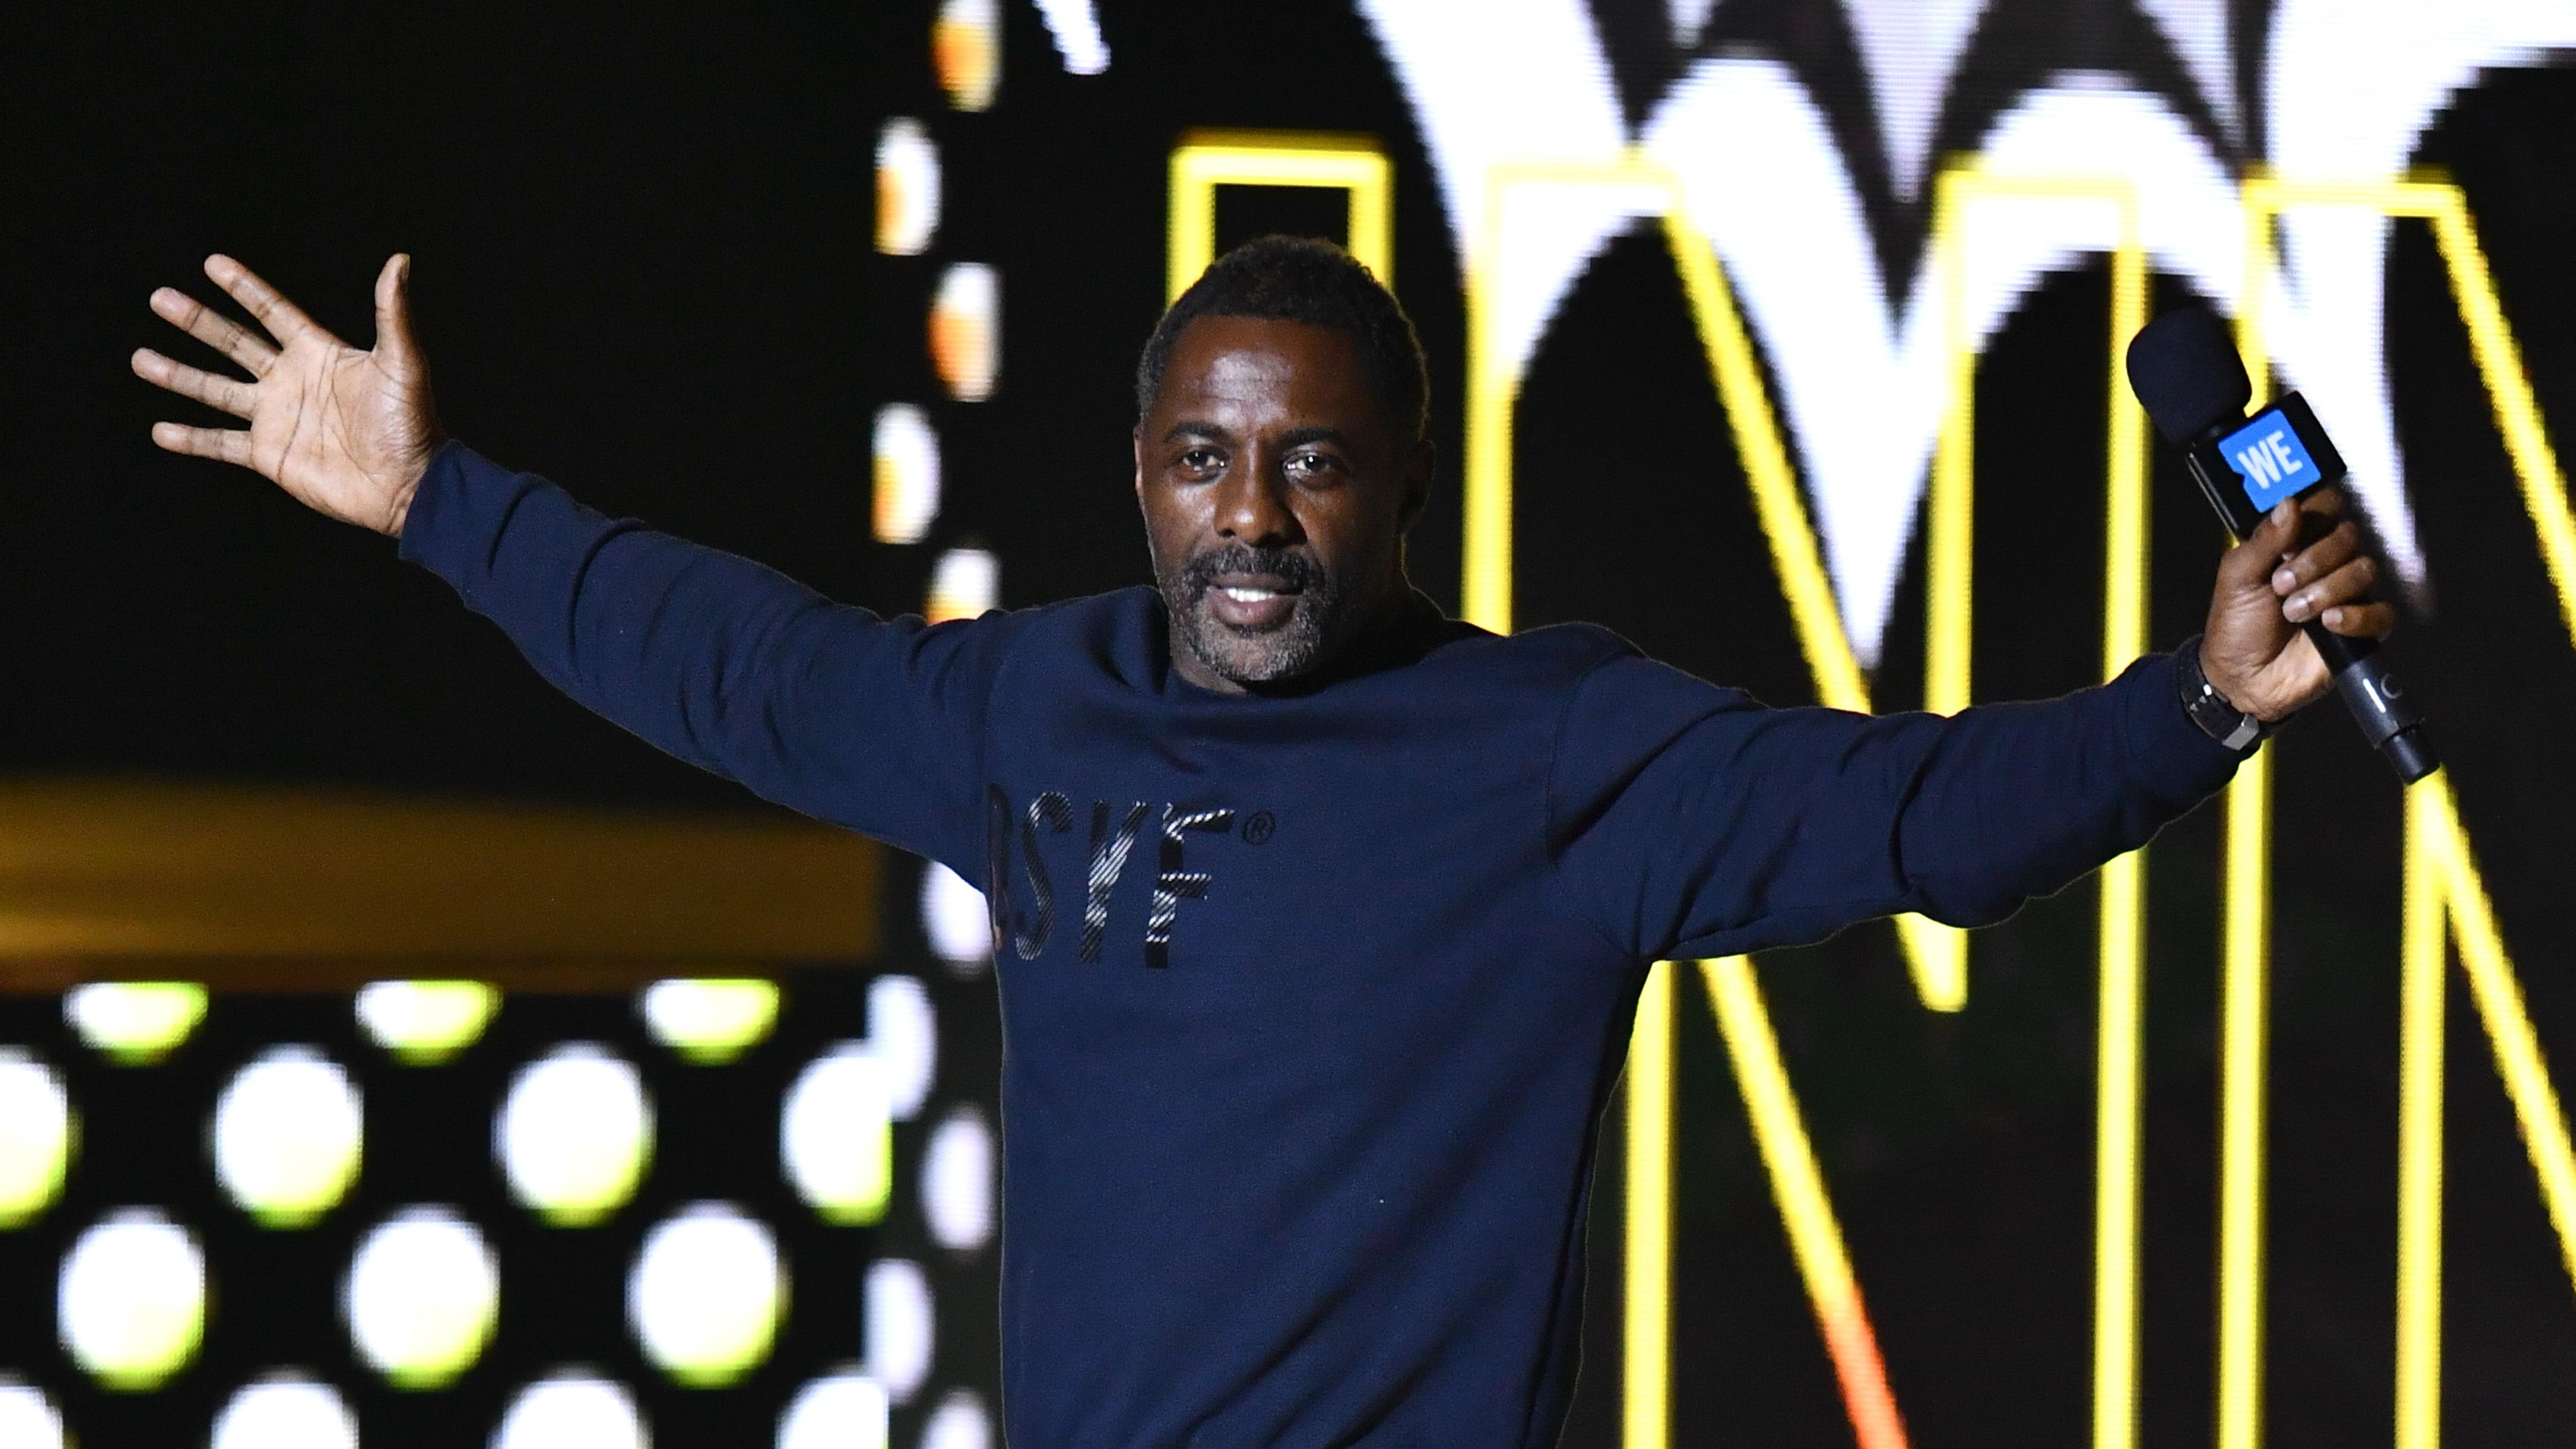 Whoops, Sonic The Hedgehog 2 just got awesome: Idris Elba is playing Knuckles